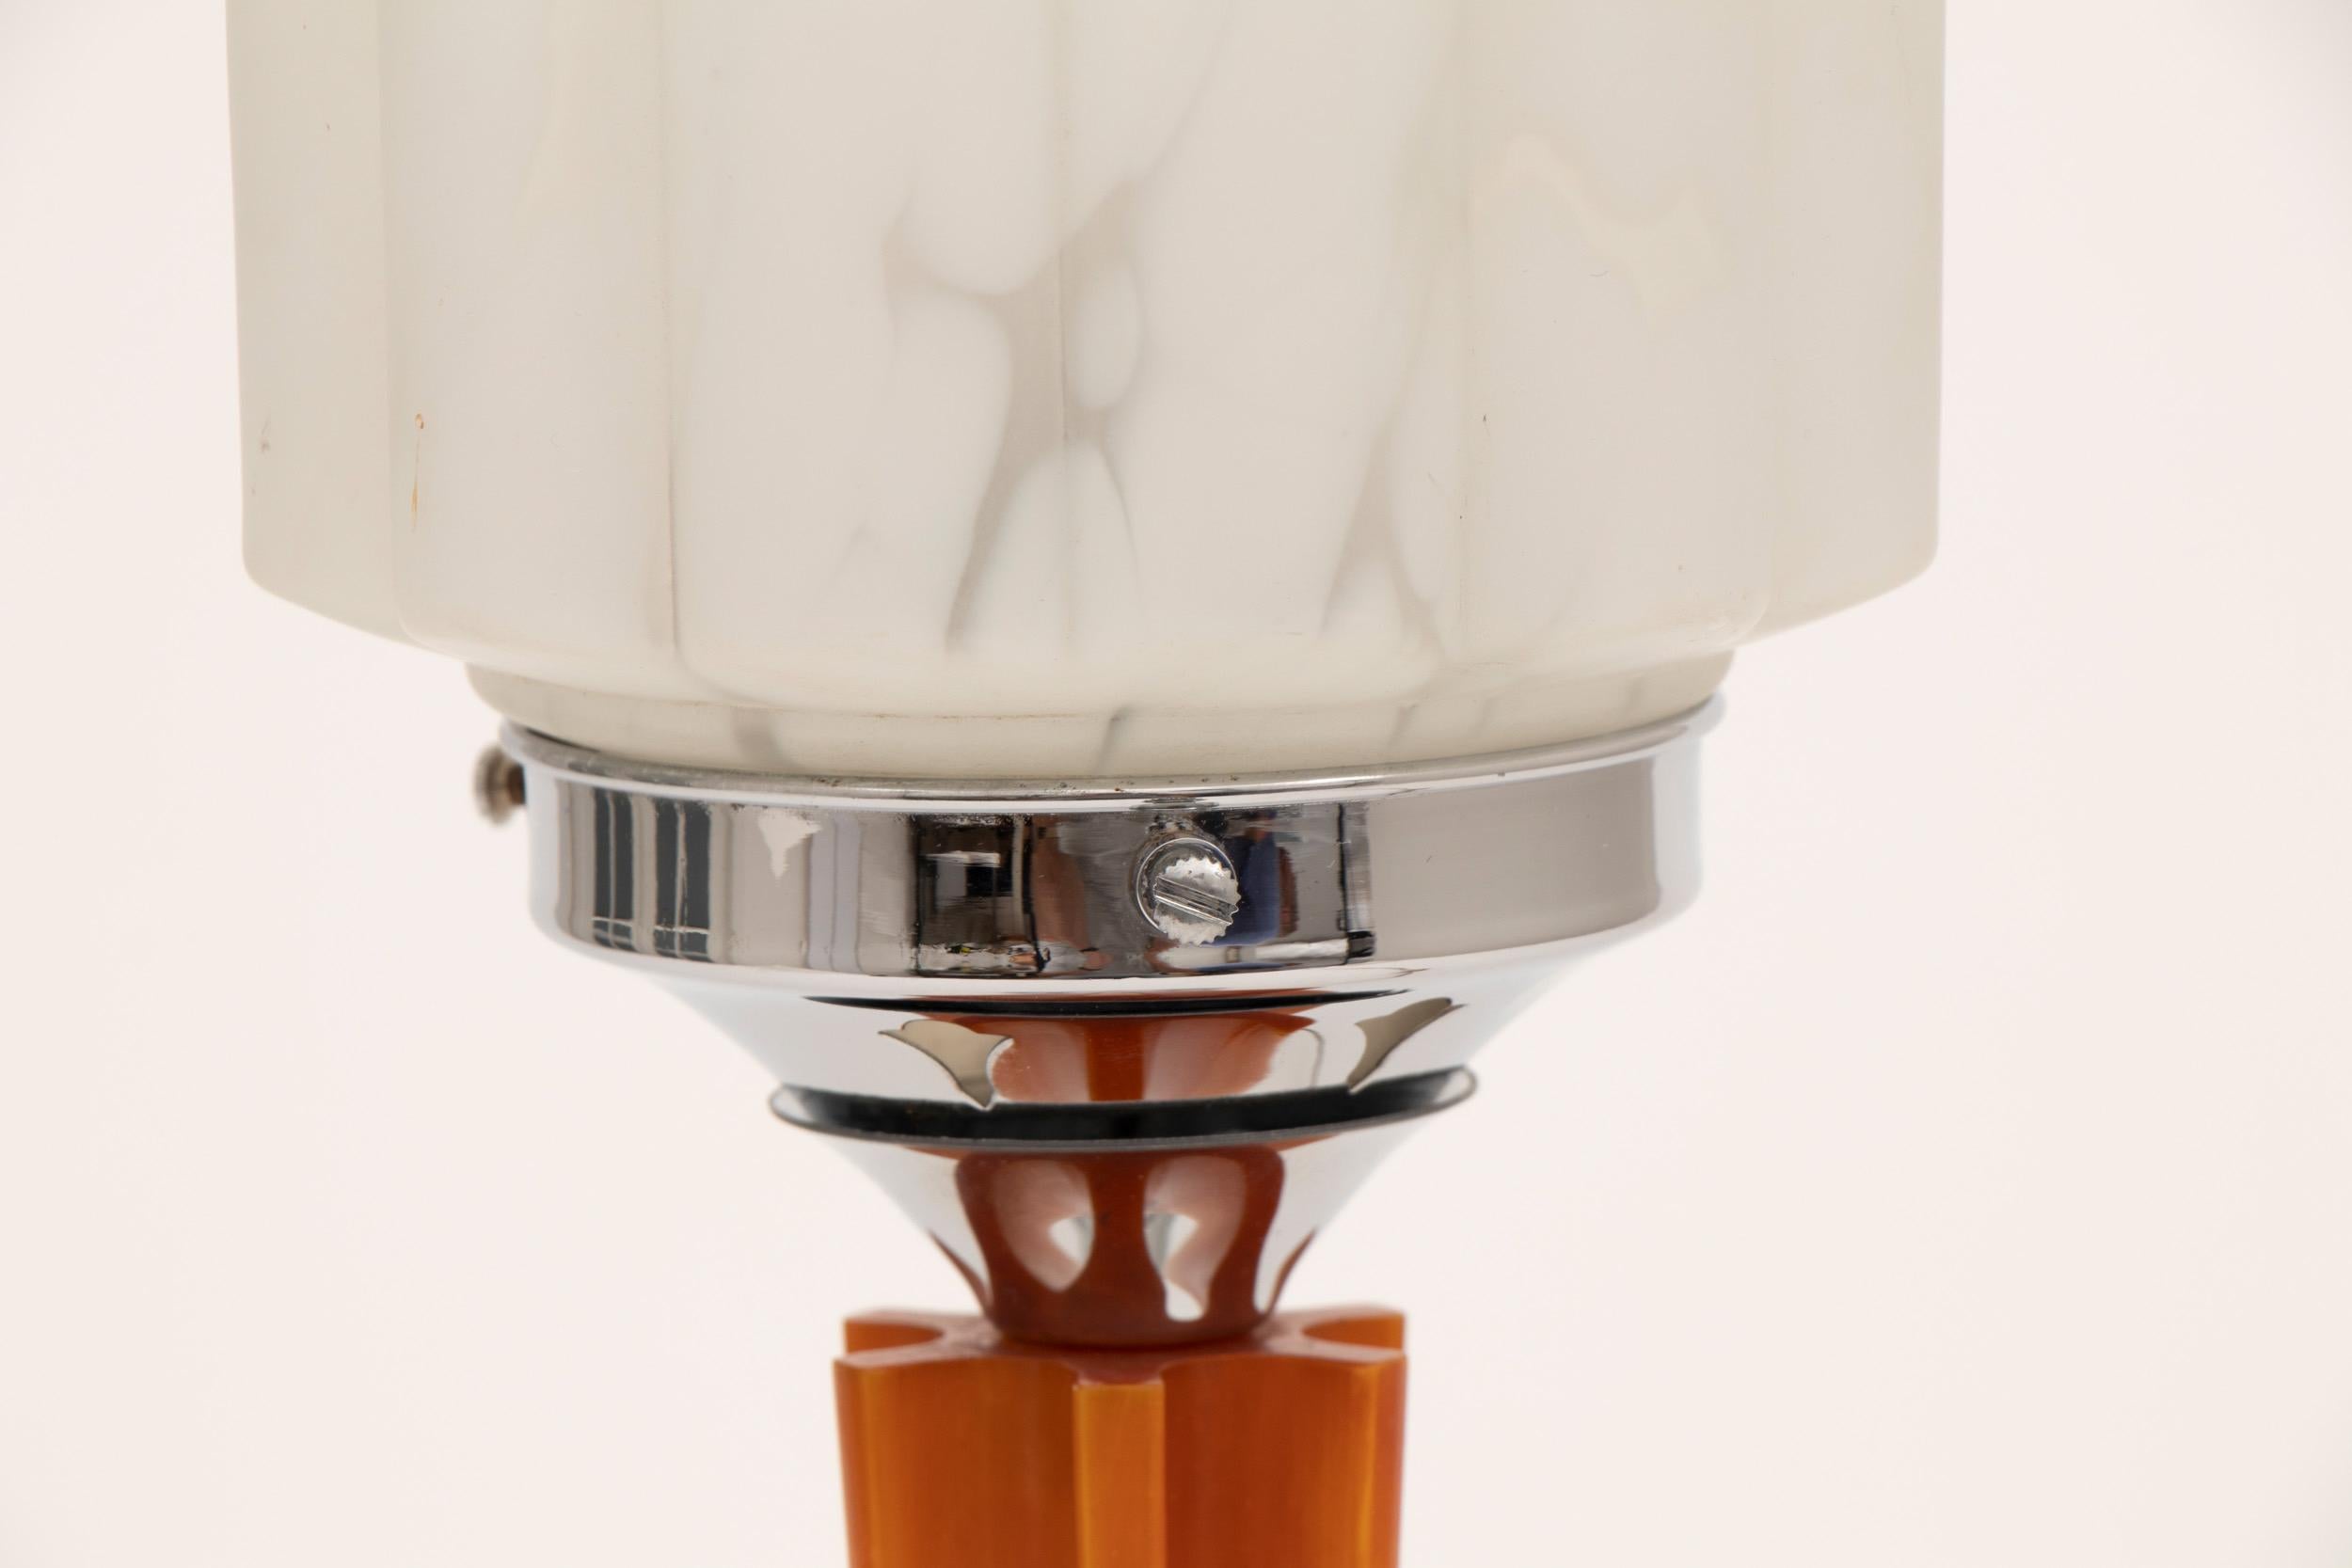 British Art Deco Skyscraper Table Lamp with Fluted Amber Bakelite Column In Good Condition For Sale In London, GB